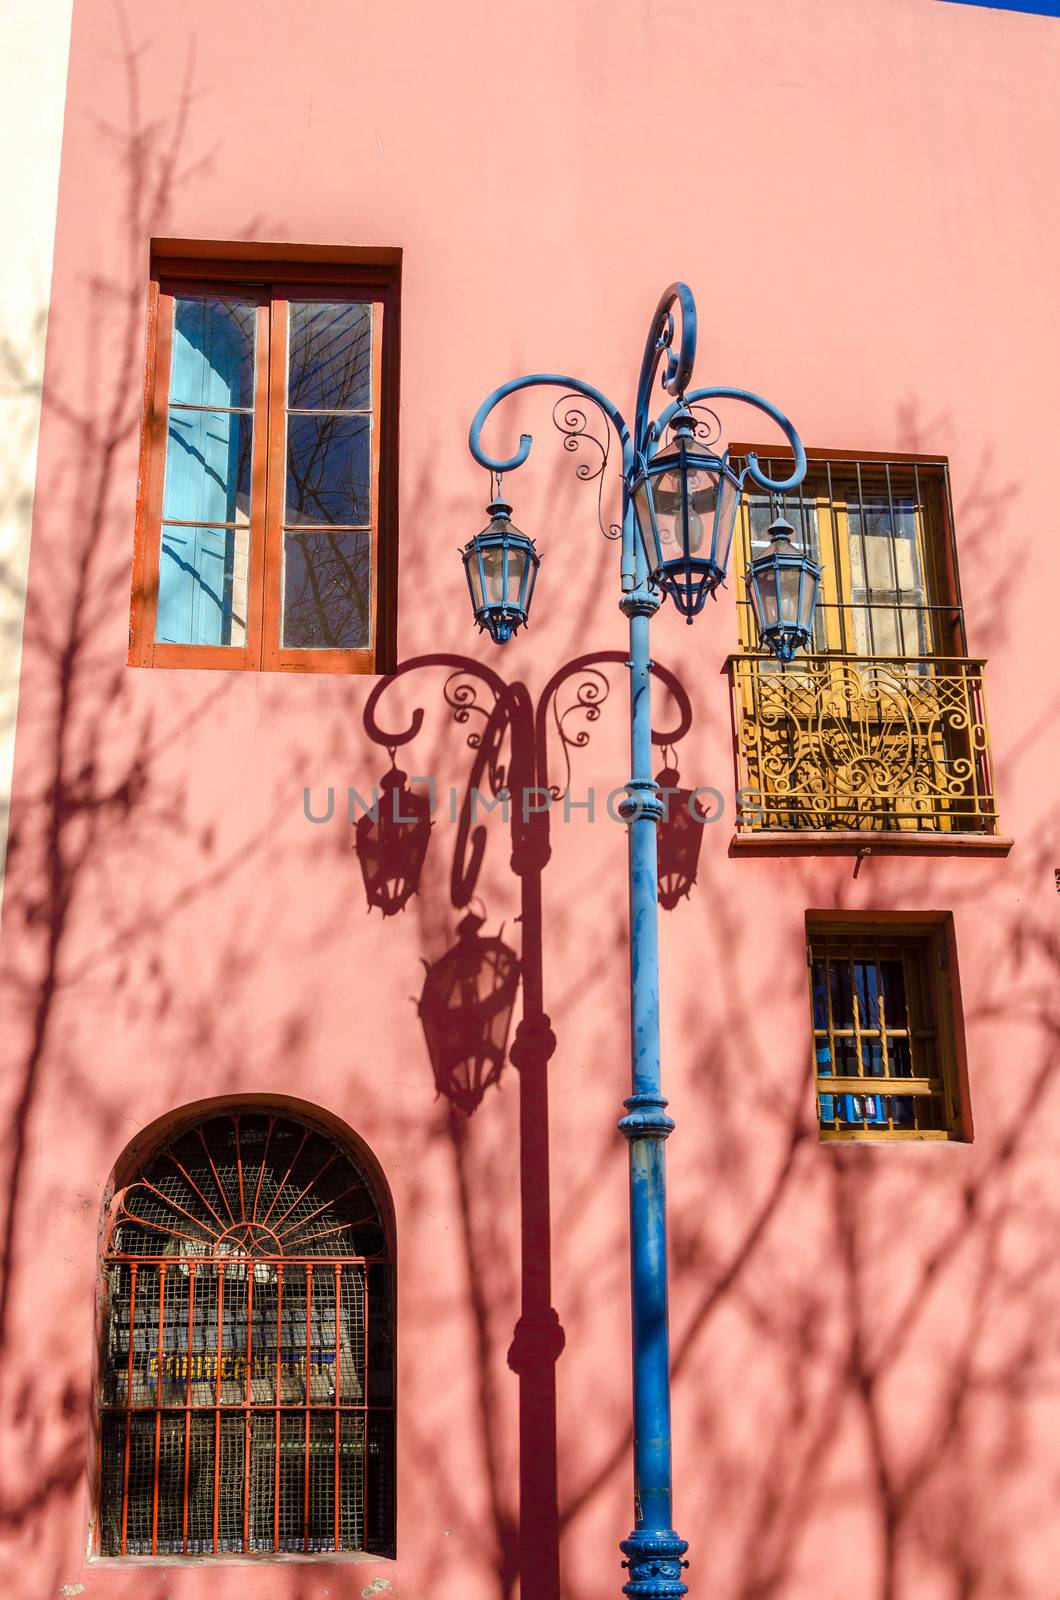 Blue streetlight in La Boca neighborhood of Buenos Aires next to a pink building